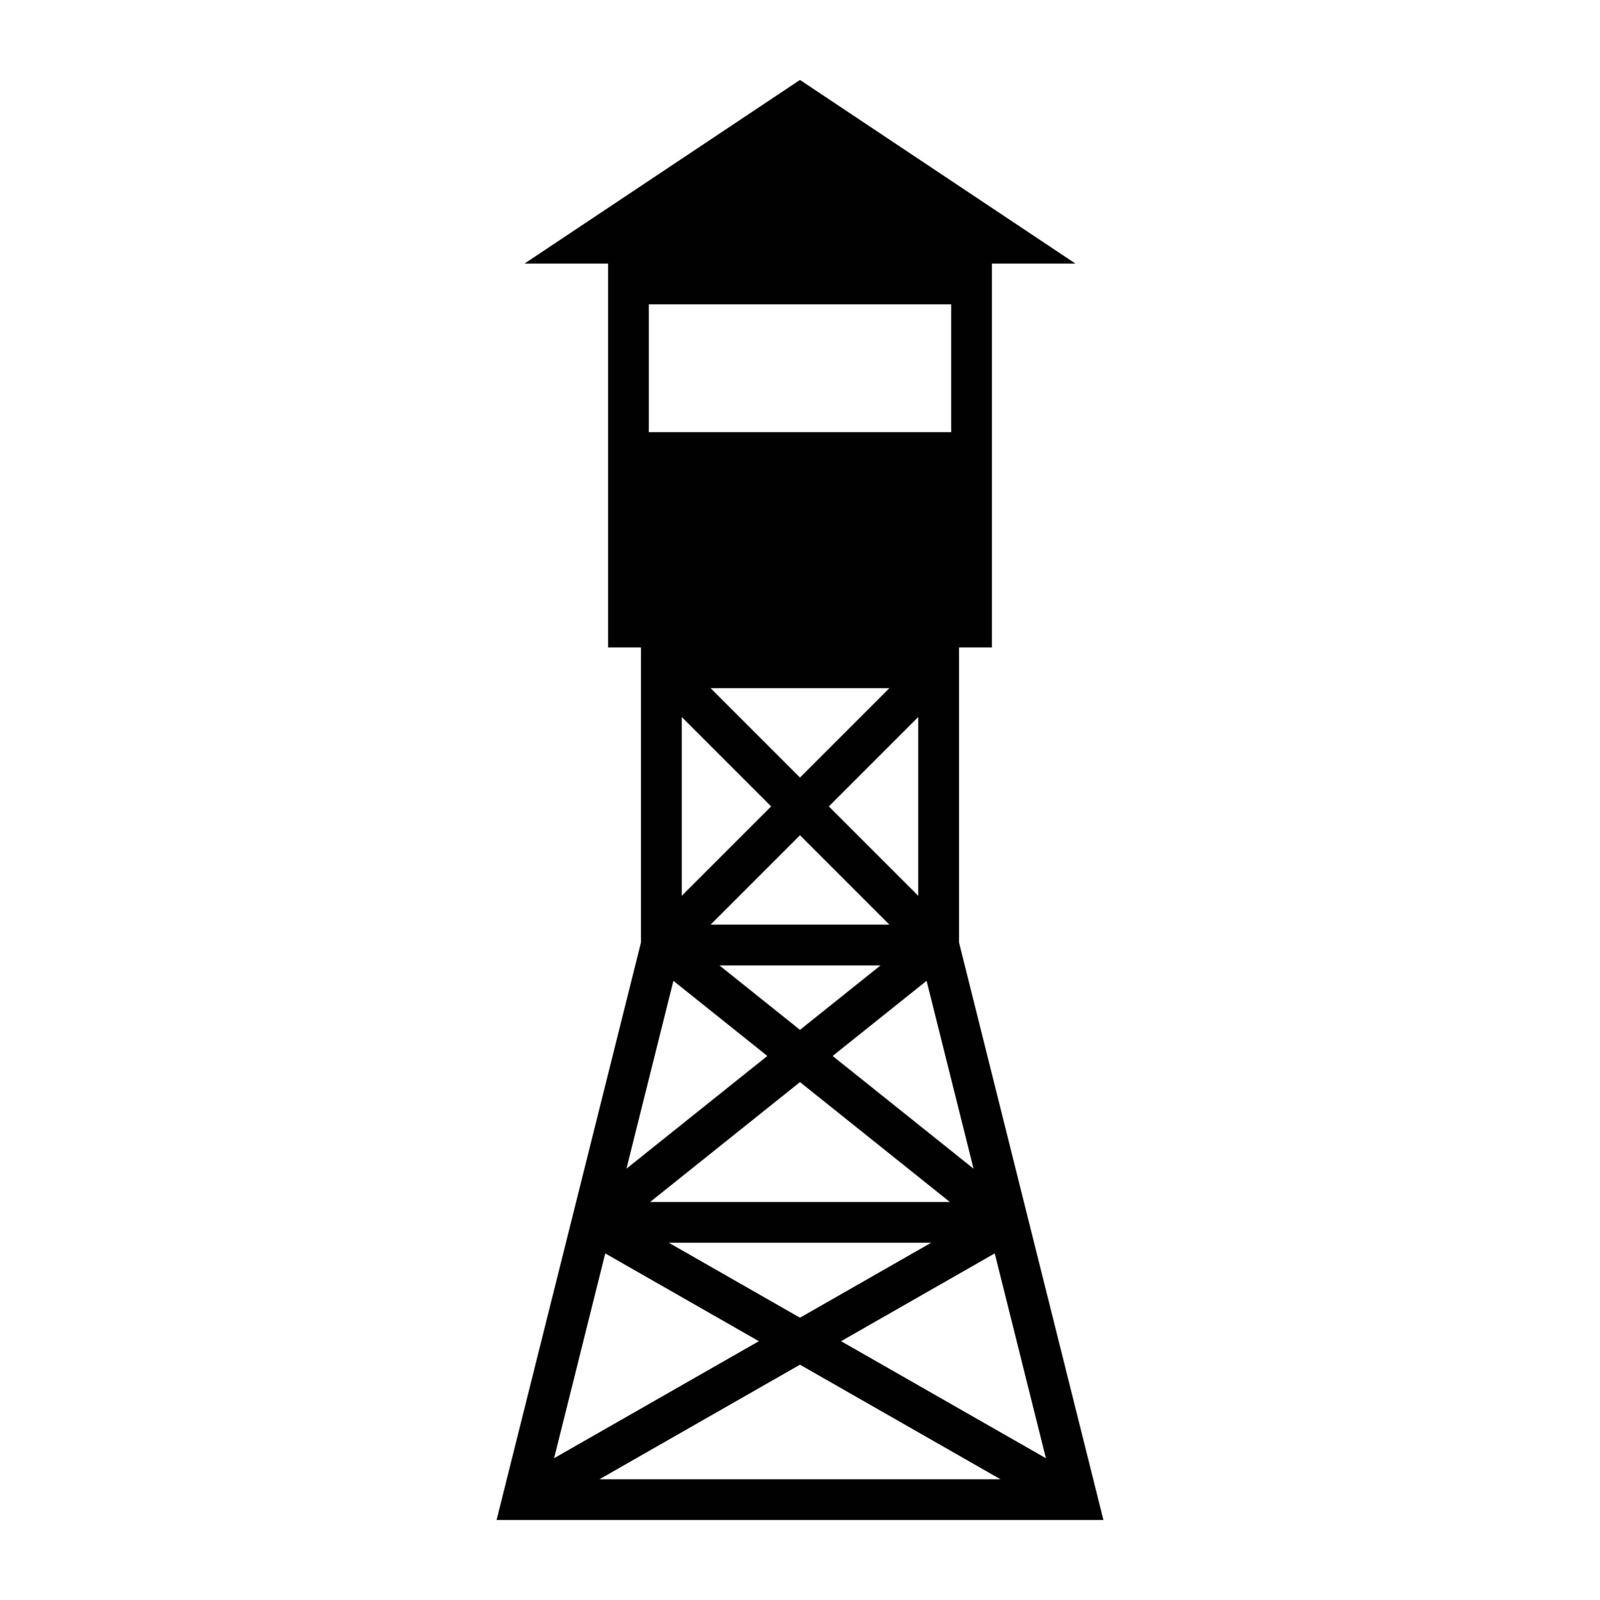 Watching tower Overview forest ranger fire site icon black color vector illustration flat style image by serhii435